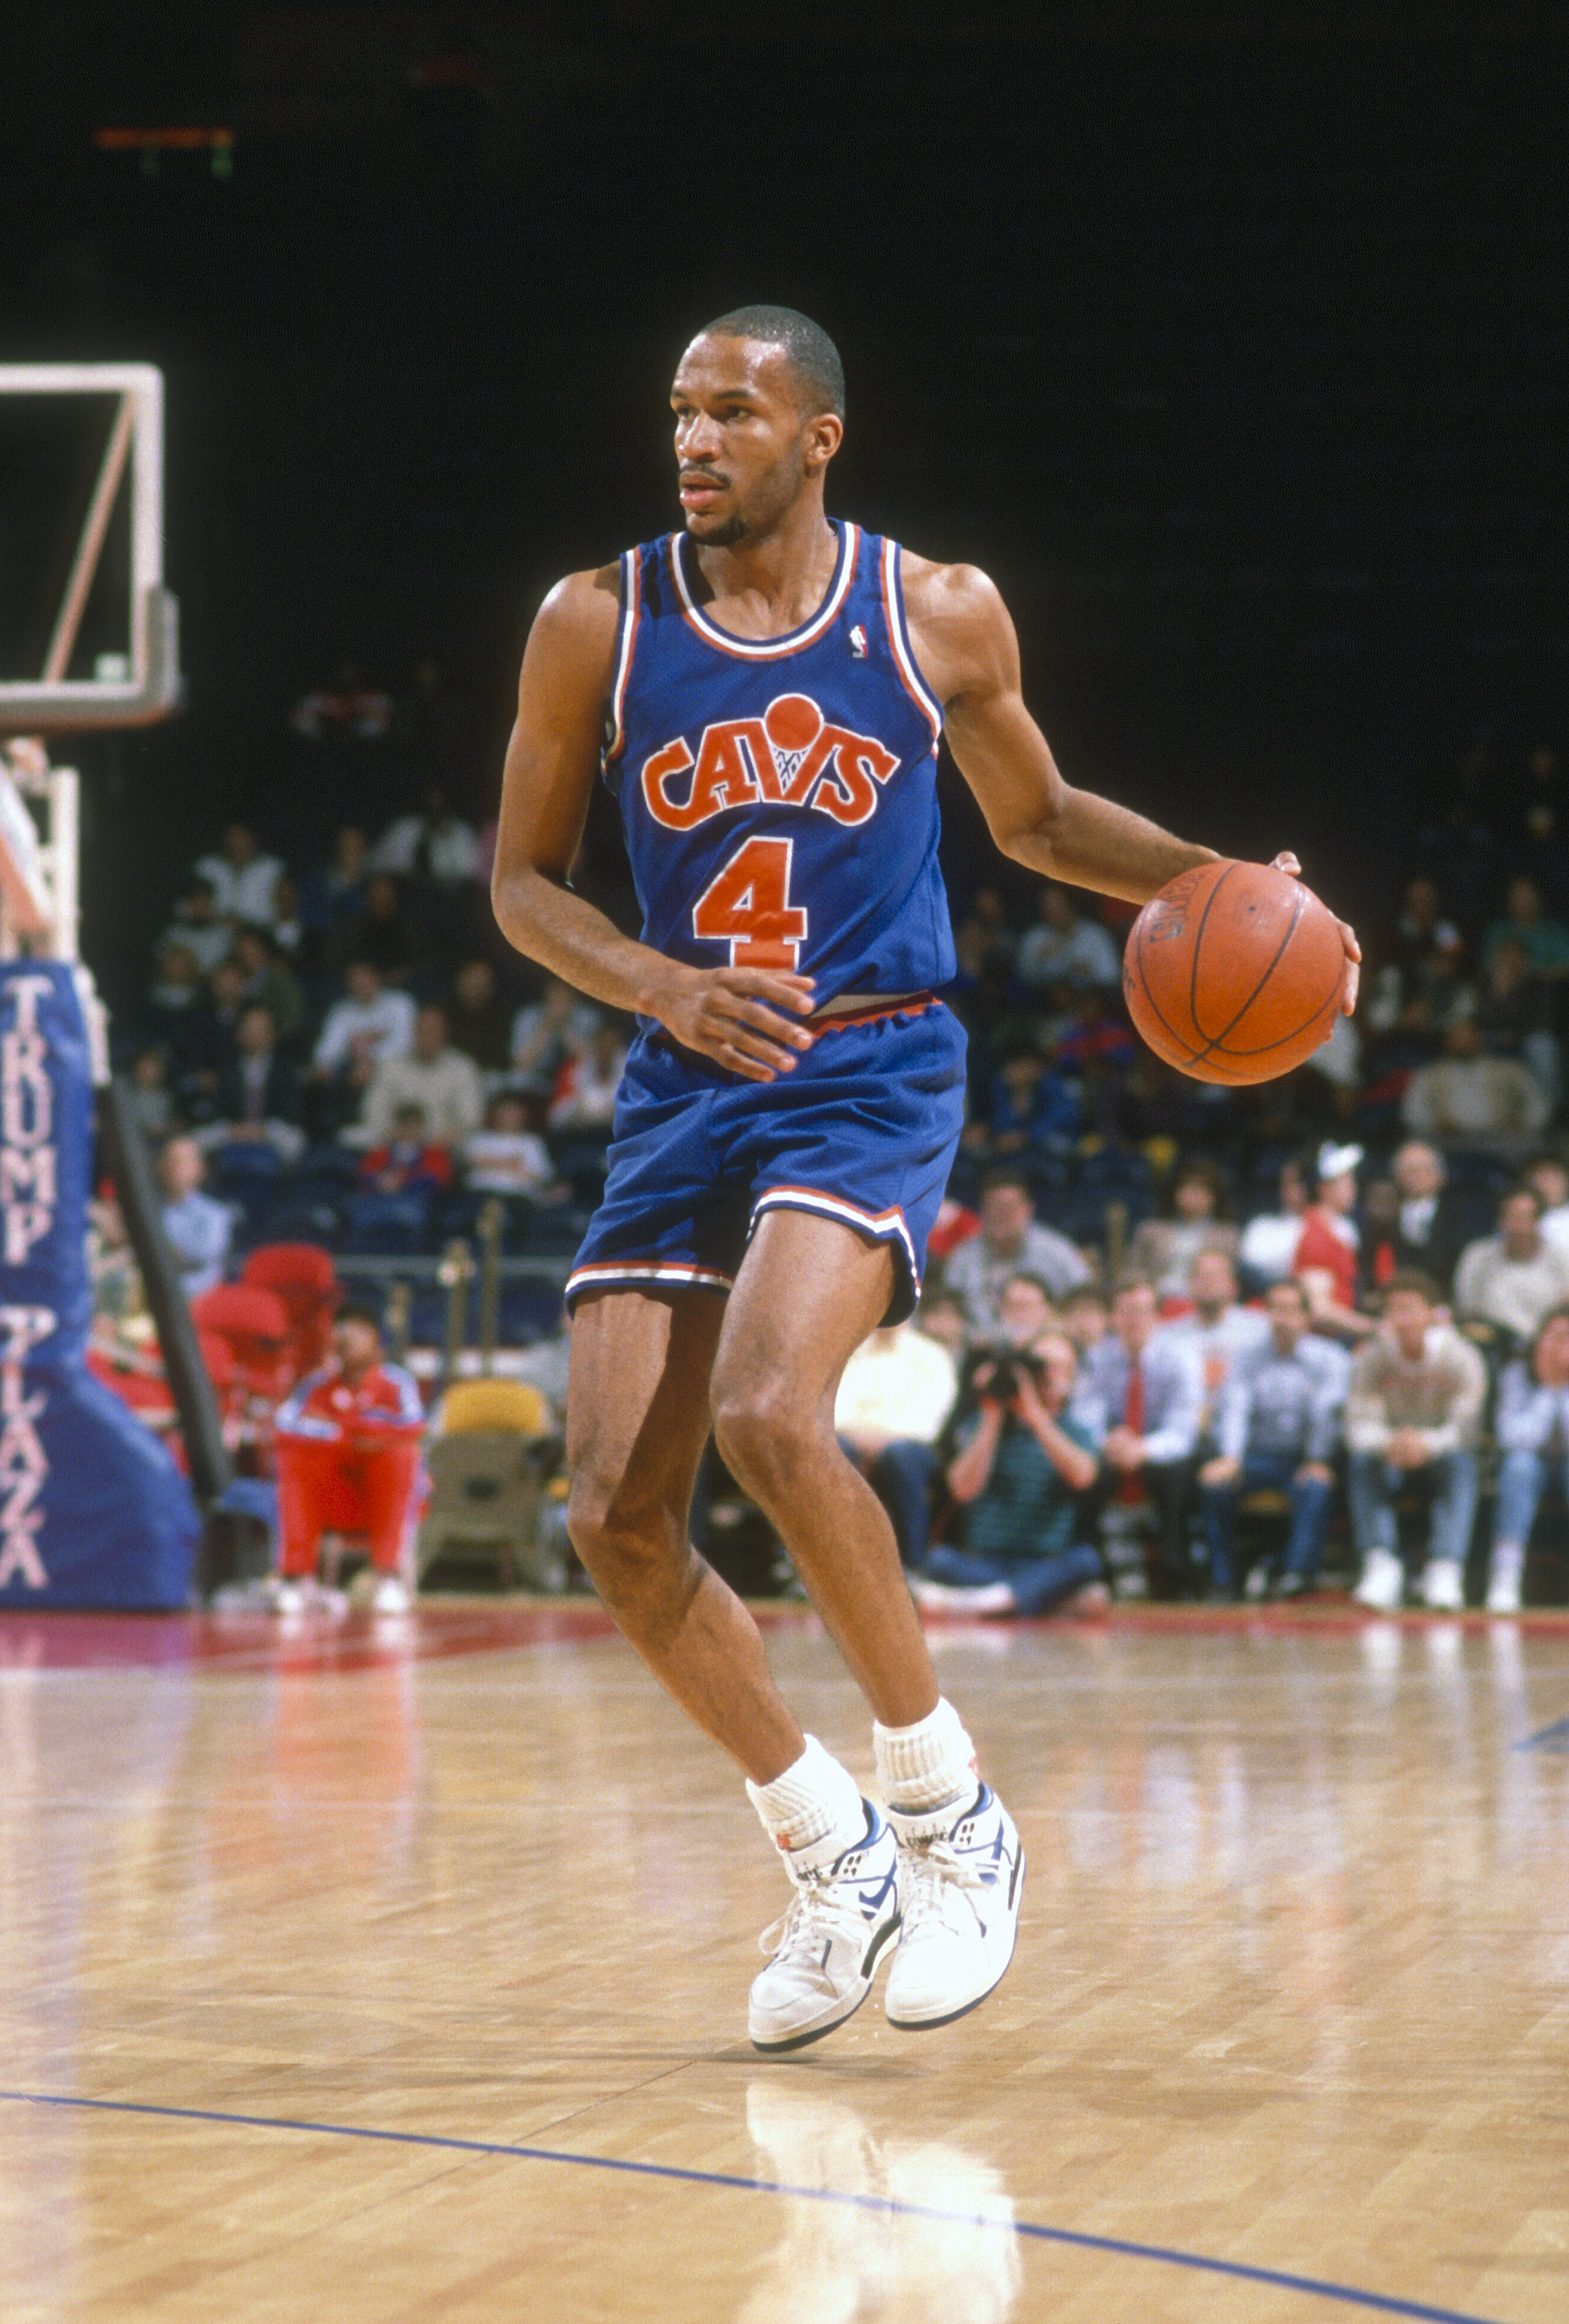 This is a a photo of Ron Harper in his 1987 season with the Cavaliers.